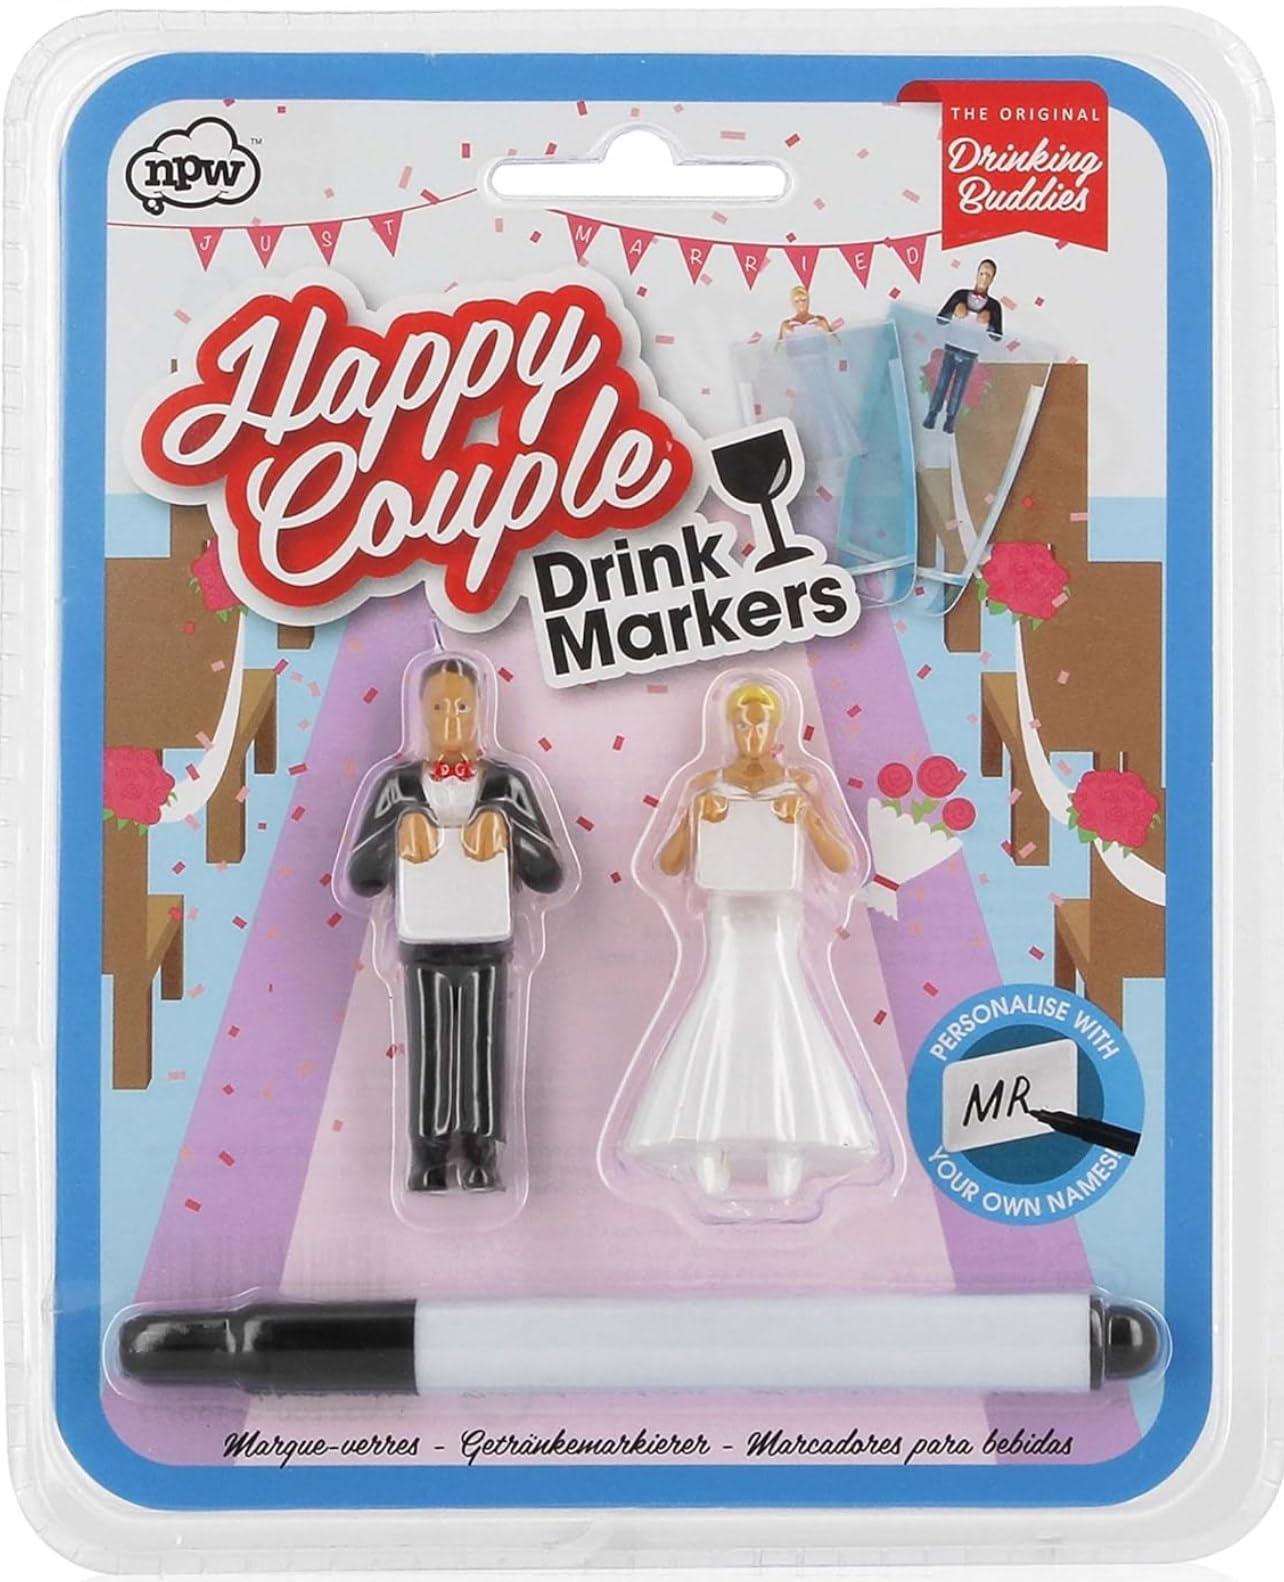 Case of 96 Sets of Happy Couple "Drinking Buddies" Wedding Glass Favours.